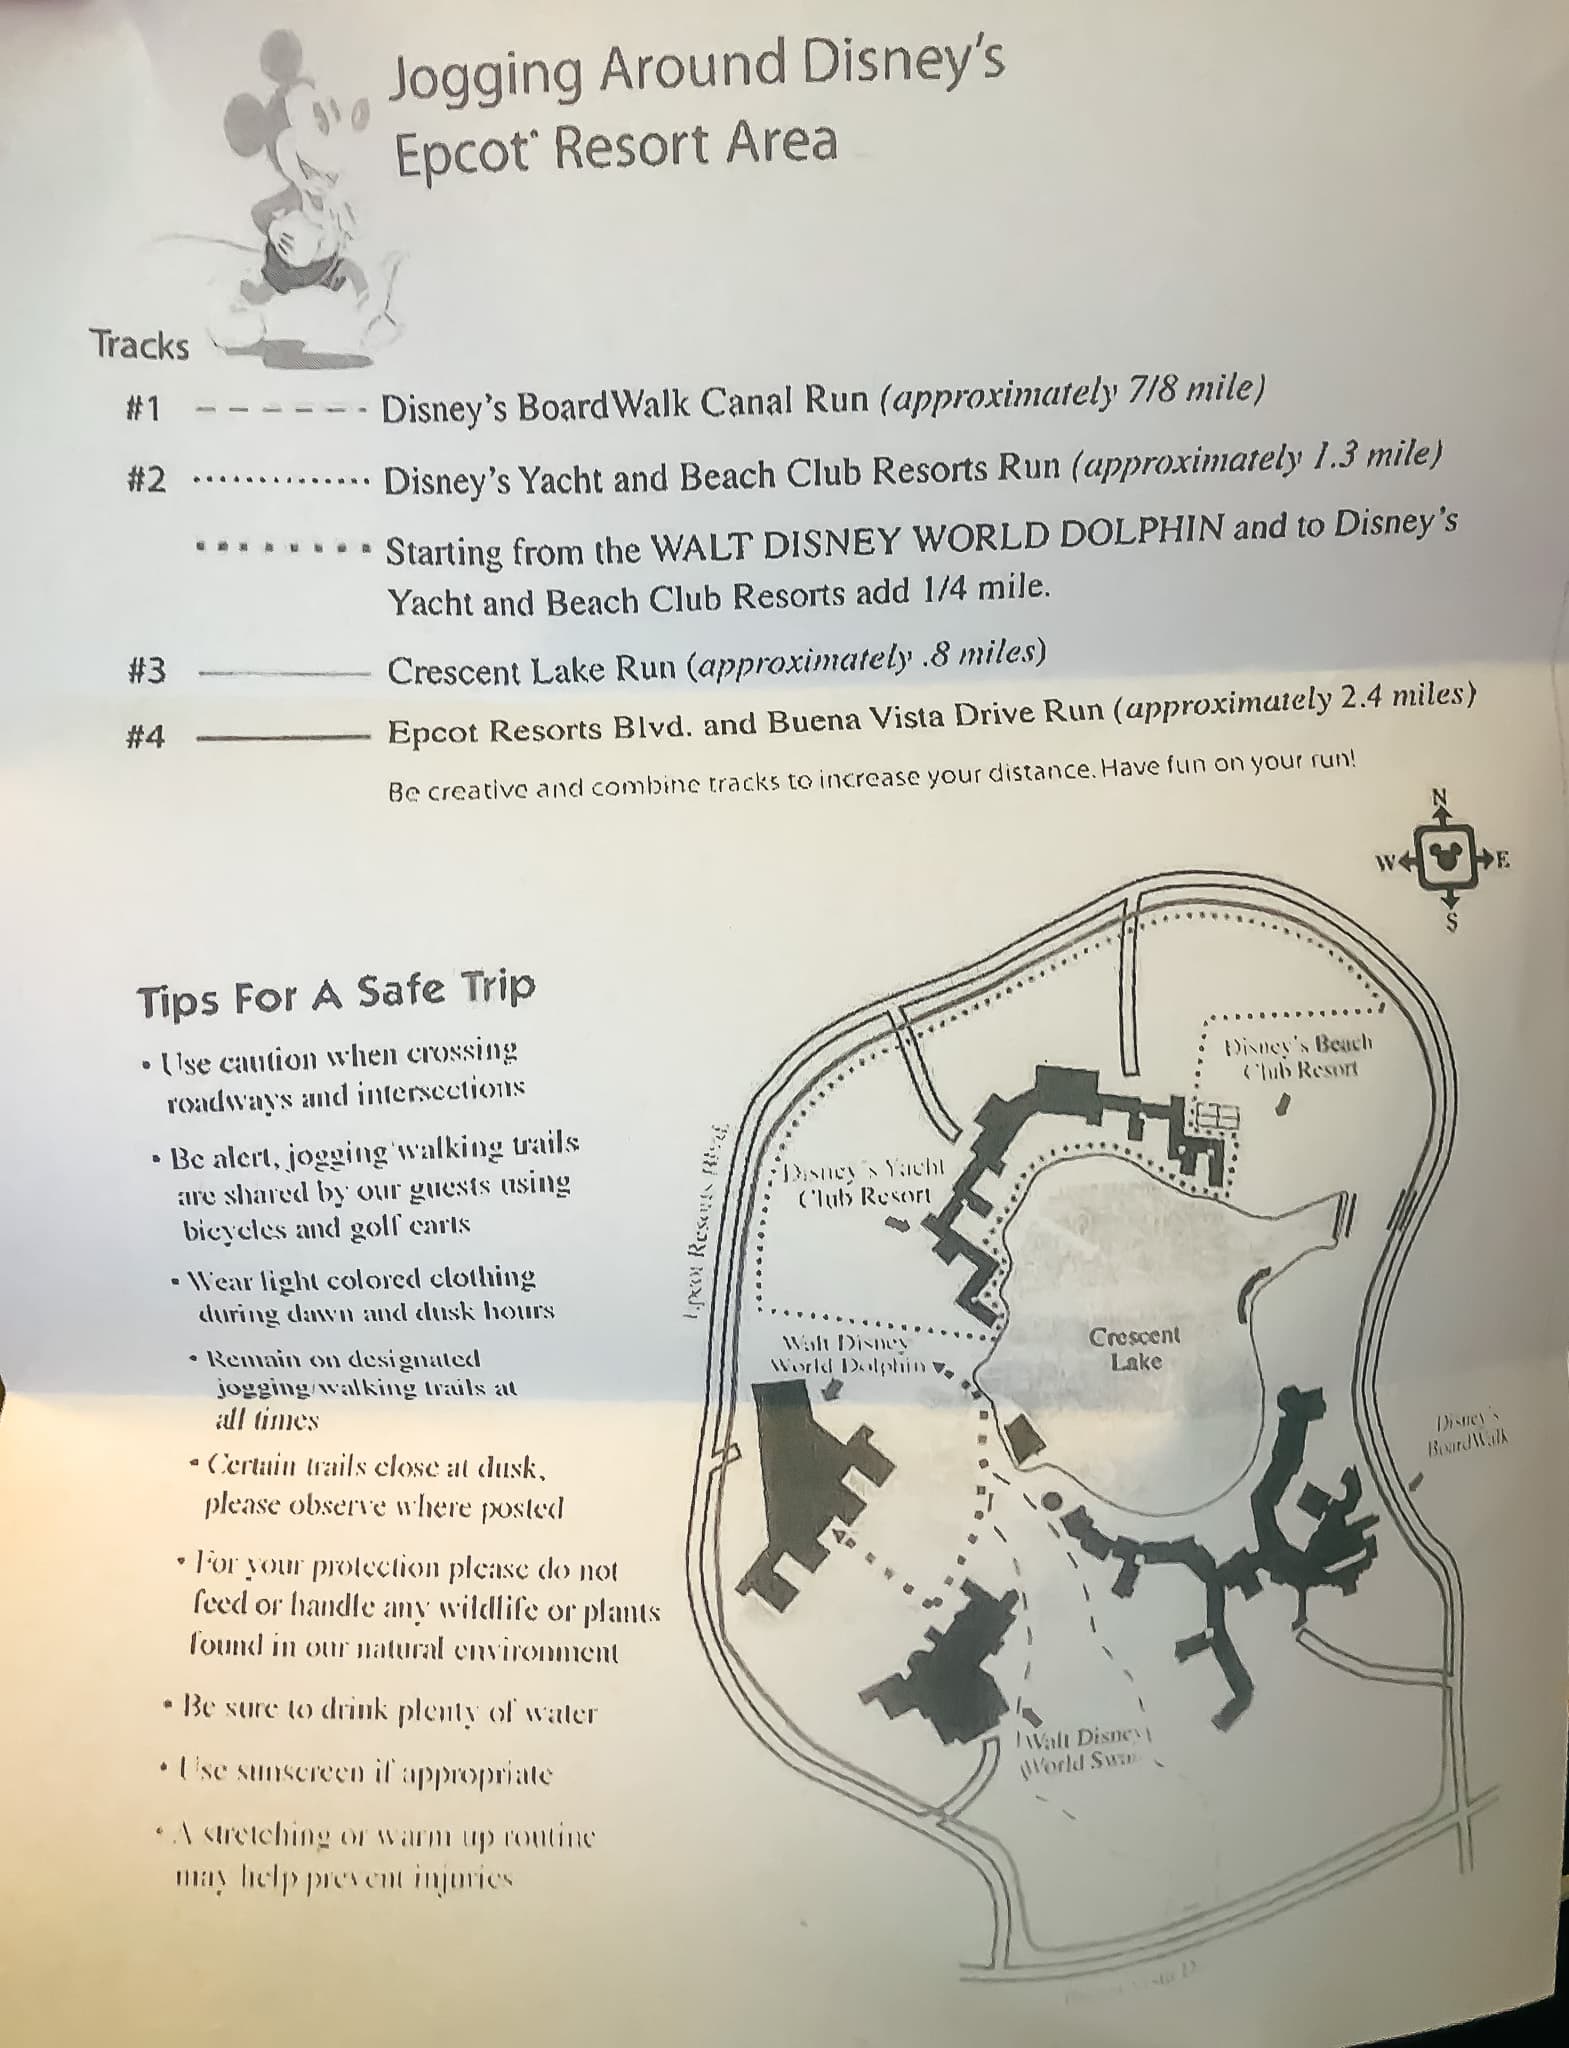 a trail map that shows various trails among the Epcot Resorts 